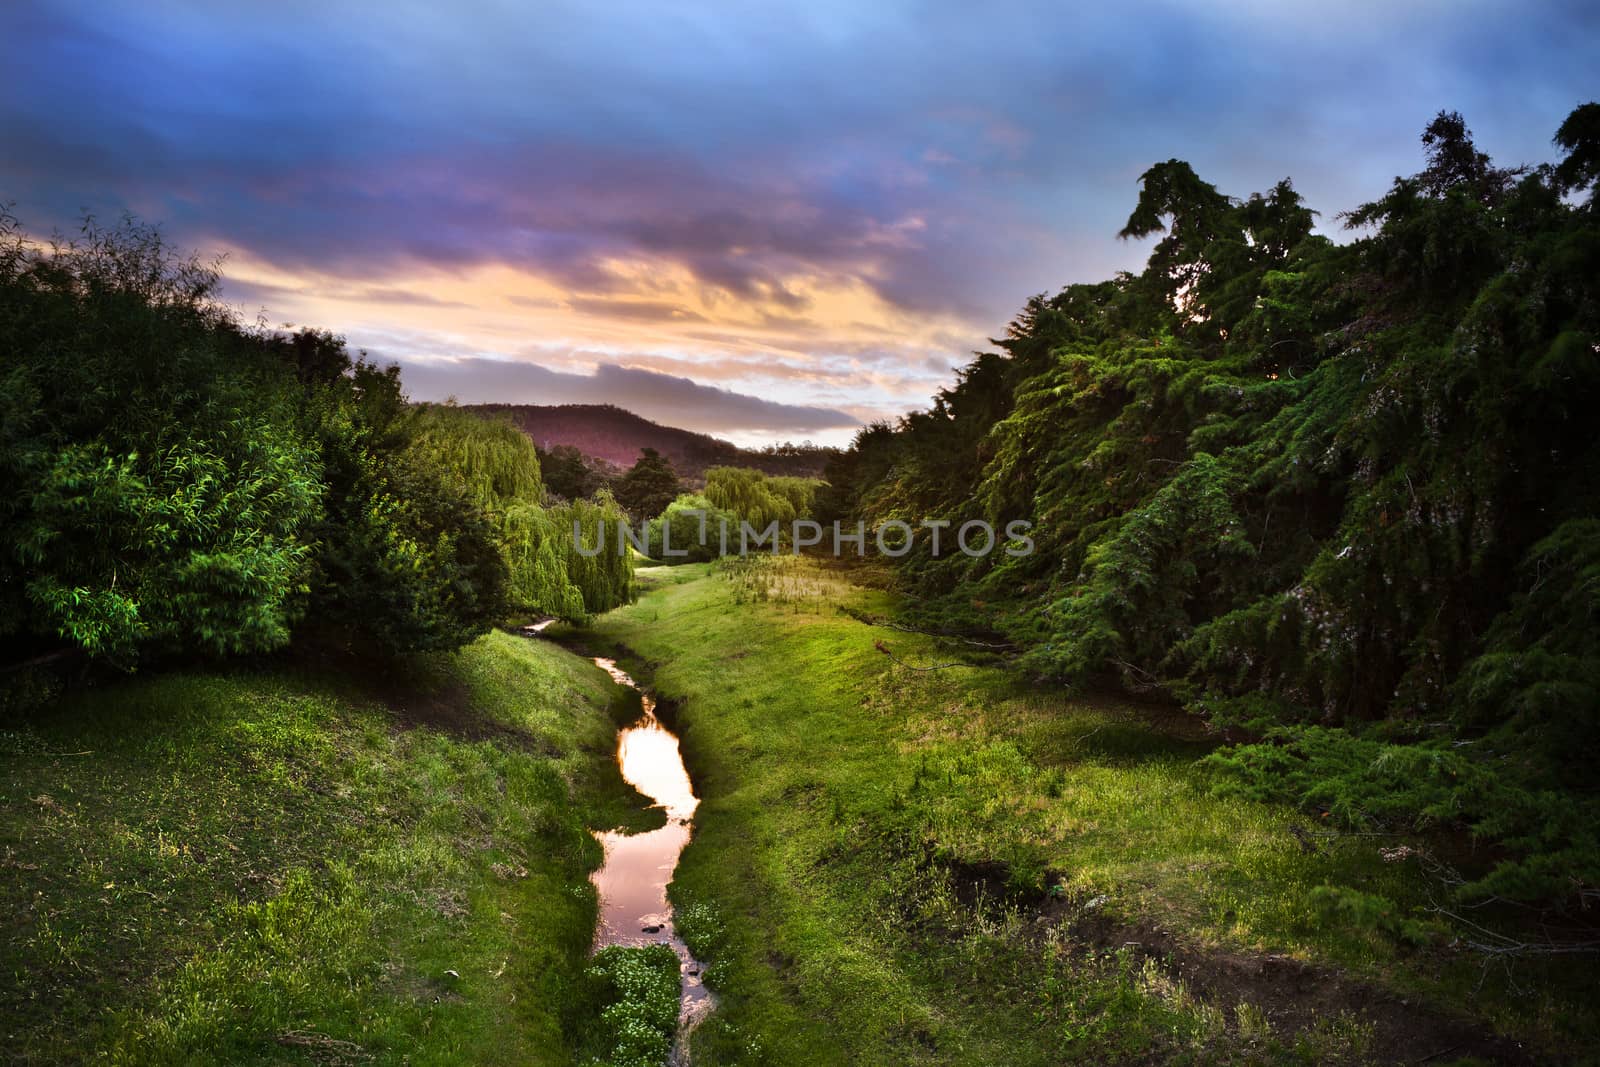 River flowing through a lush green valley under a sunset sky with clouds